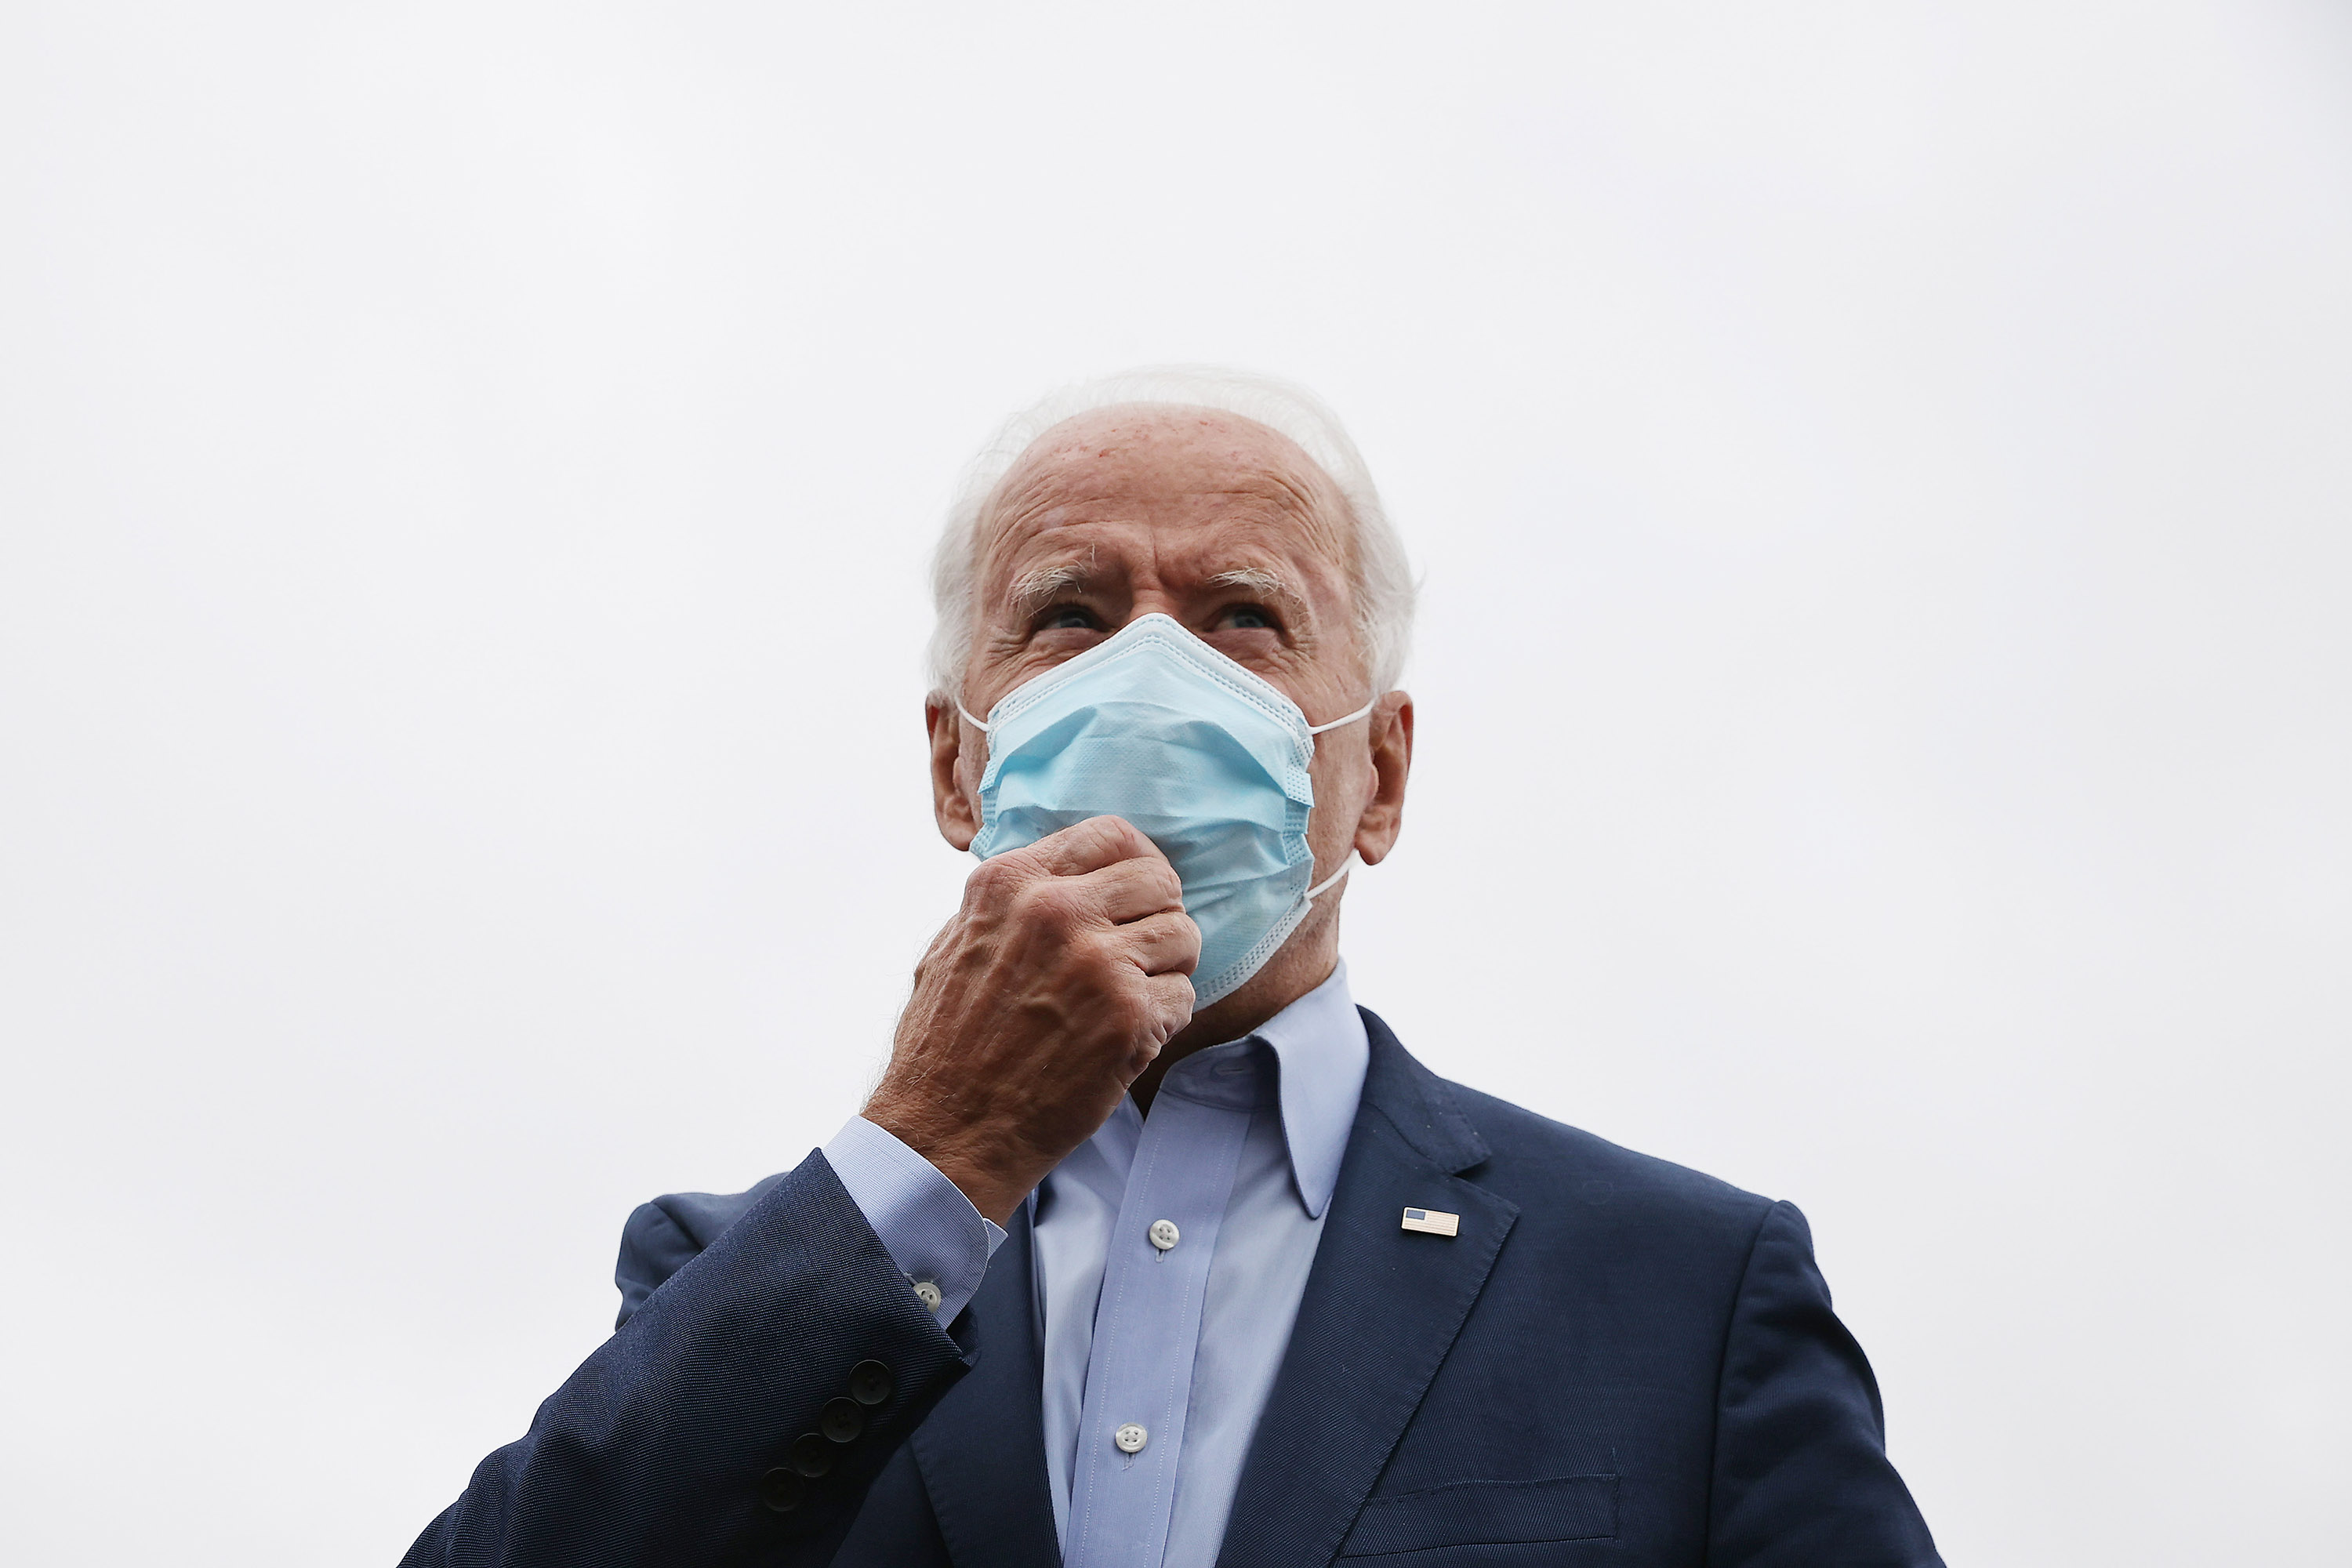 Democratic presidential nominee Joe Biden talks to reporters before boarding a flight to Ohio at New Castle County Airport in New Castle, Delaware, on Monday, October 12.